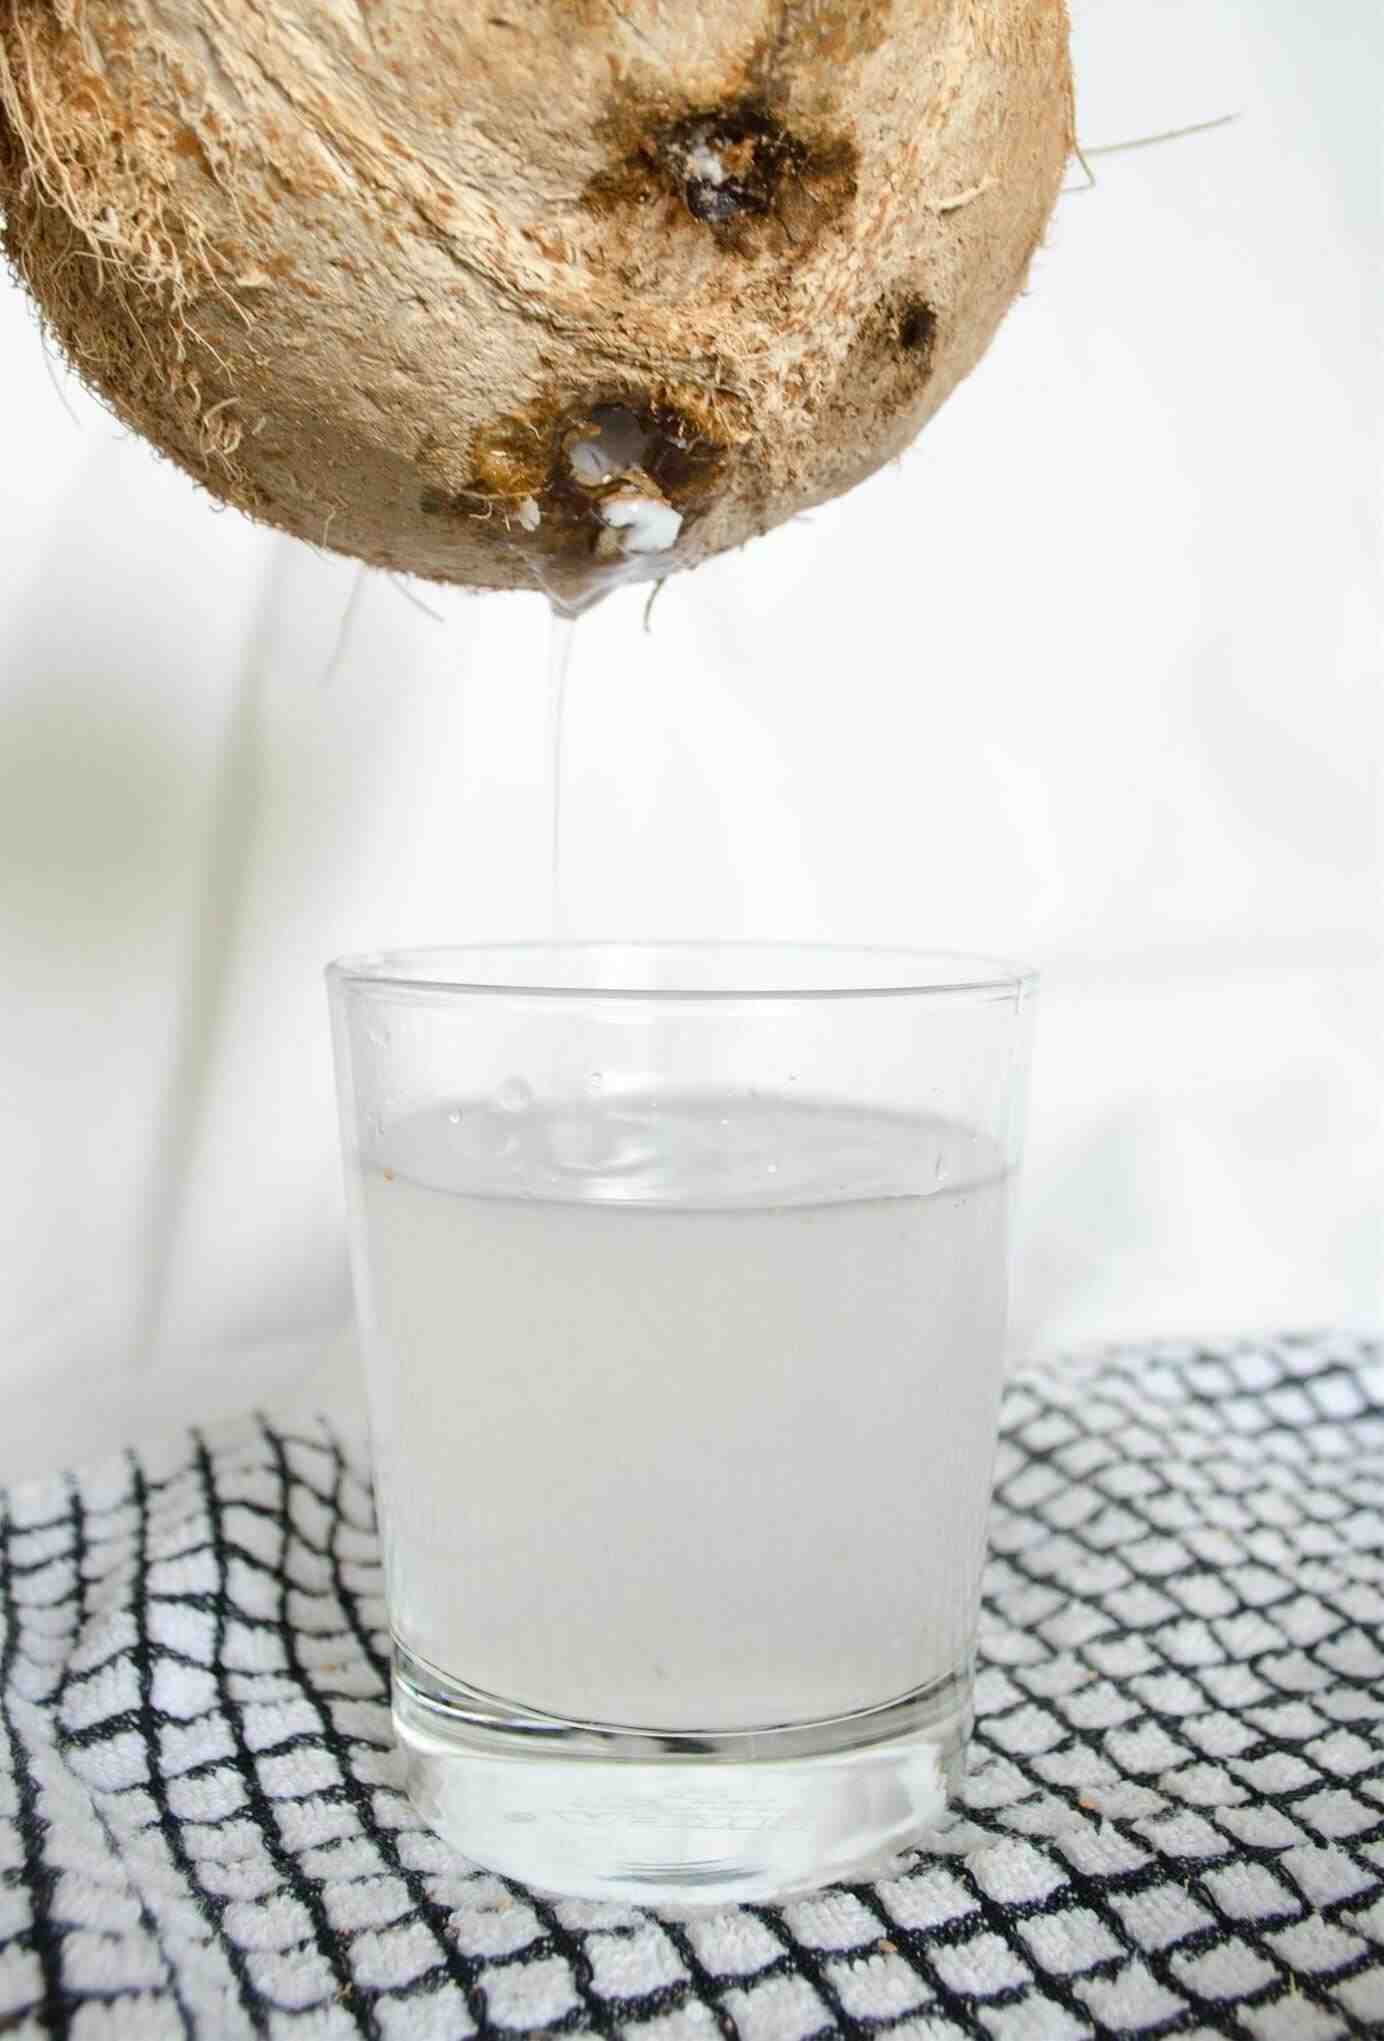 How do you get the water out of a coconut?